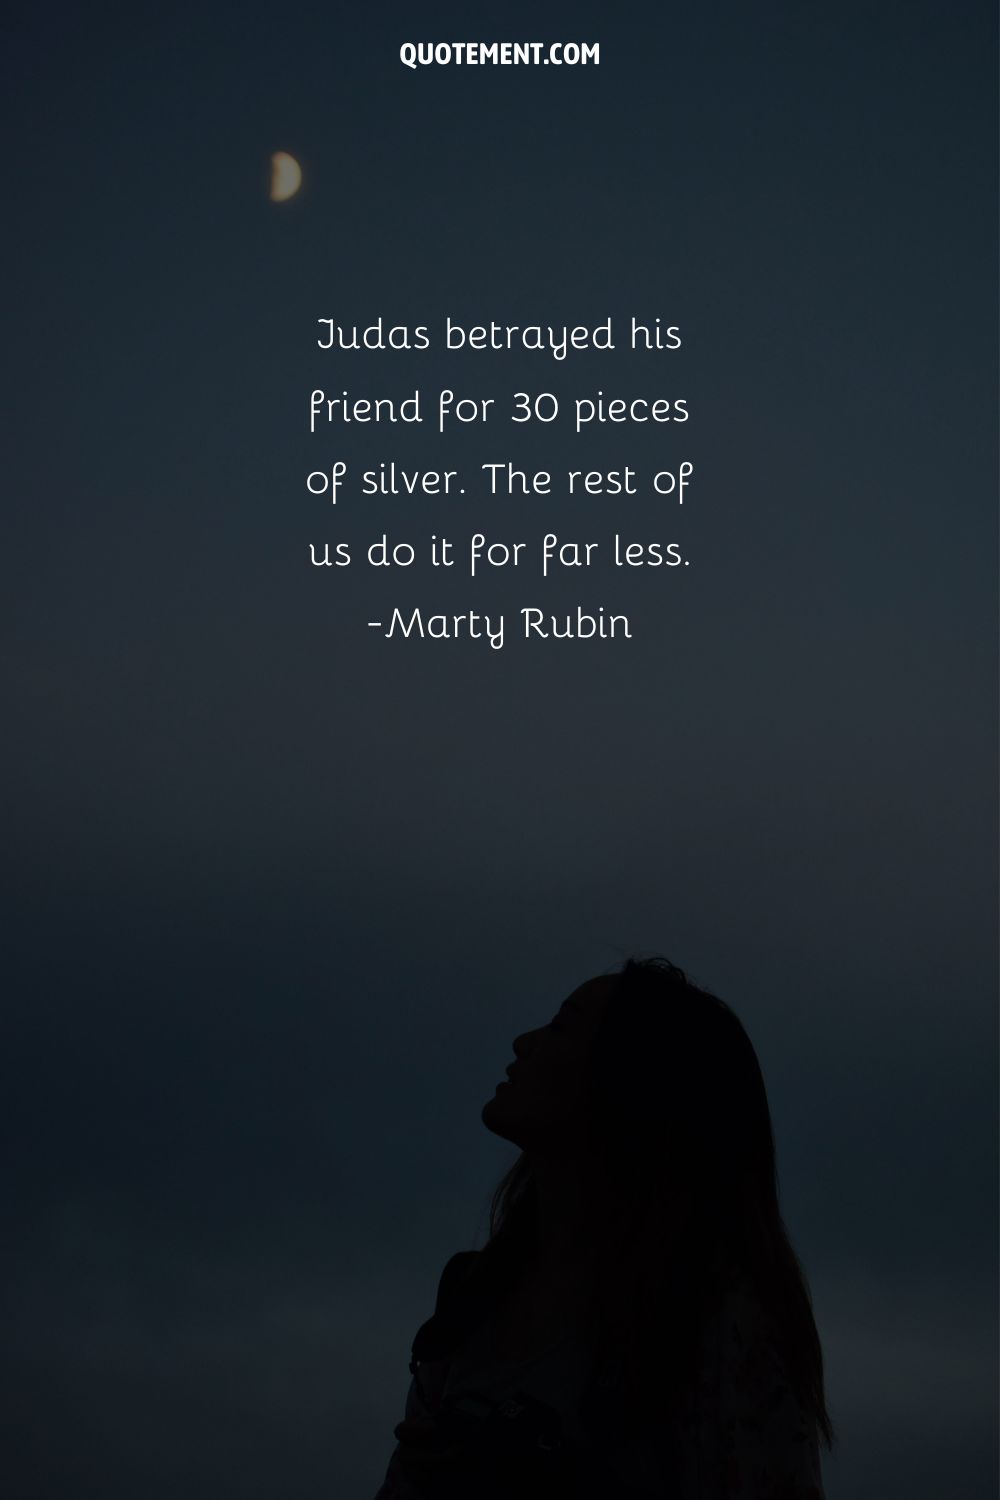 Judas betrayed his friend for 30 pieces of silver. The rest of us do it for far less